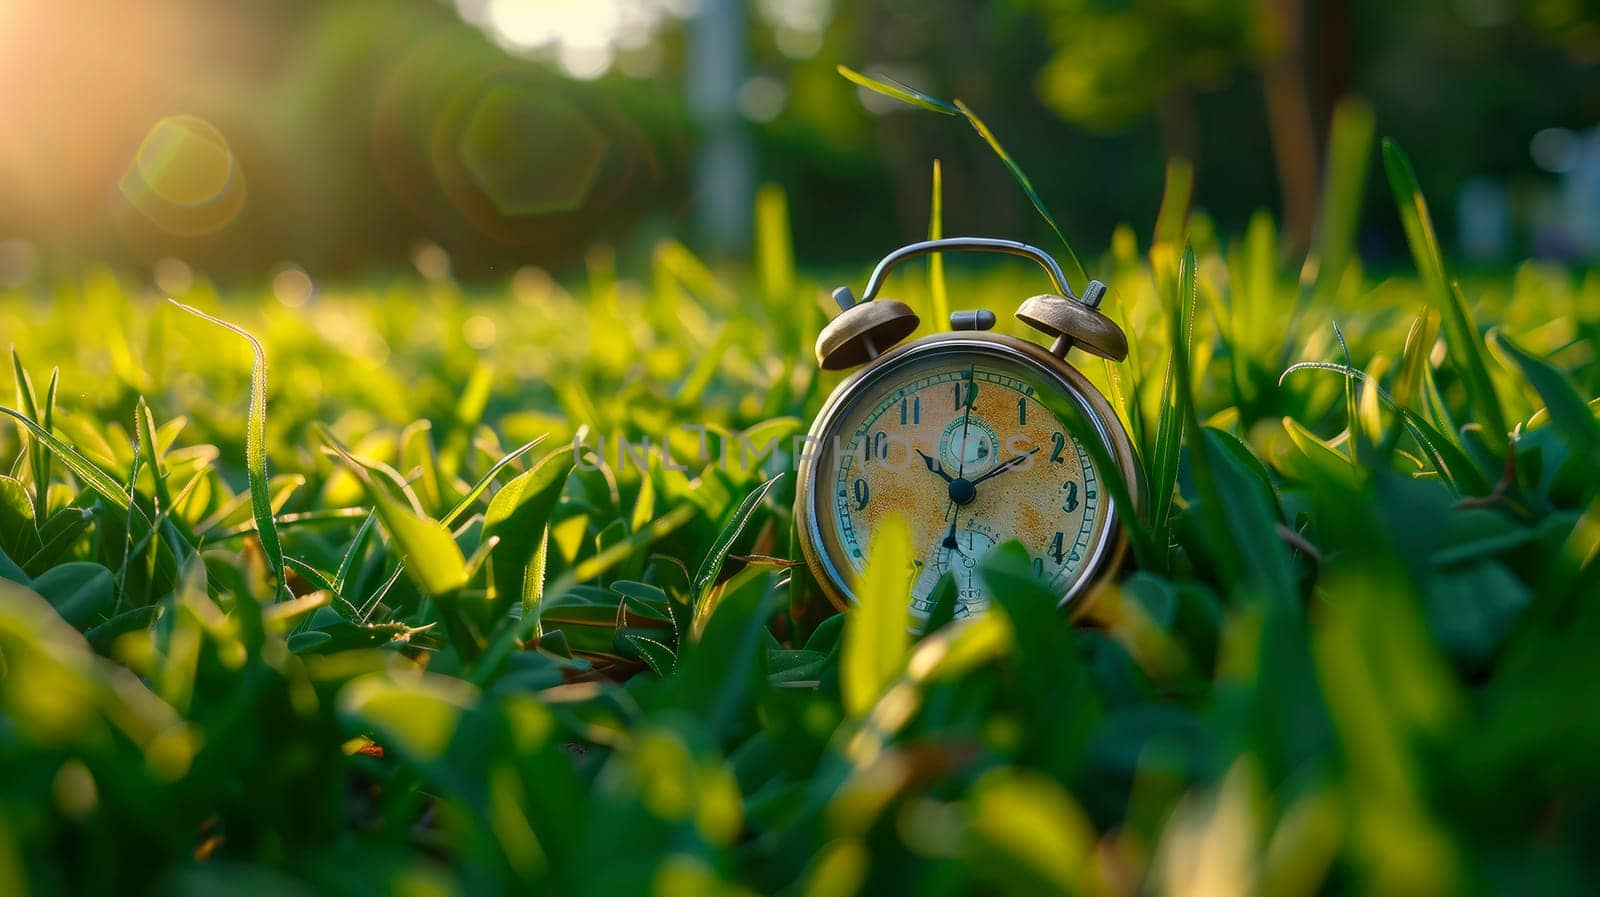 alarm clock on the grass in the park. selective focus. nature.